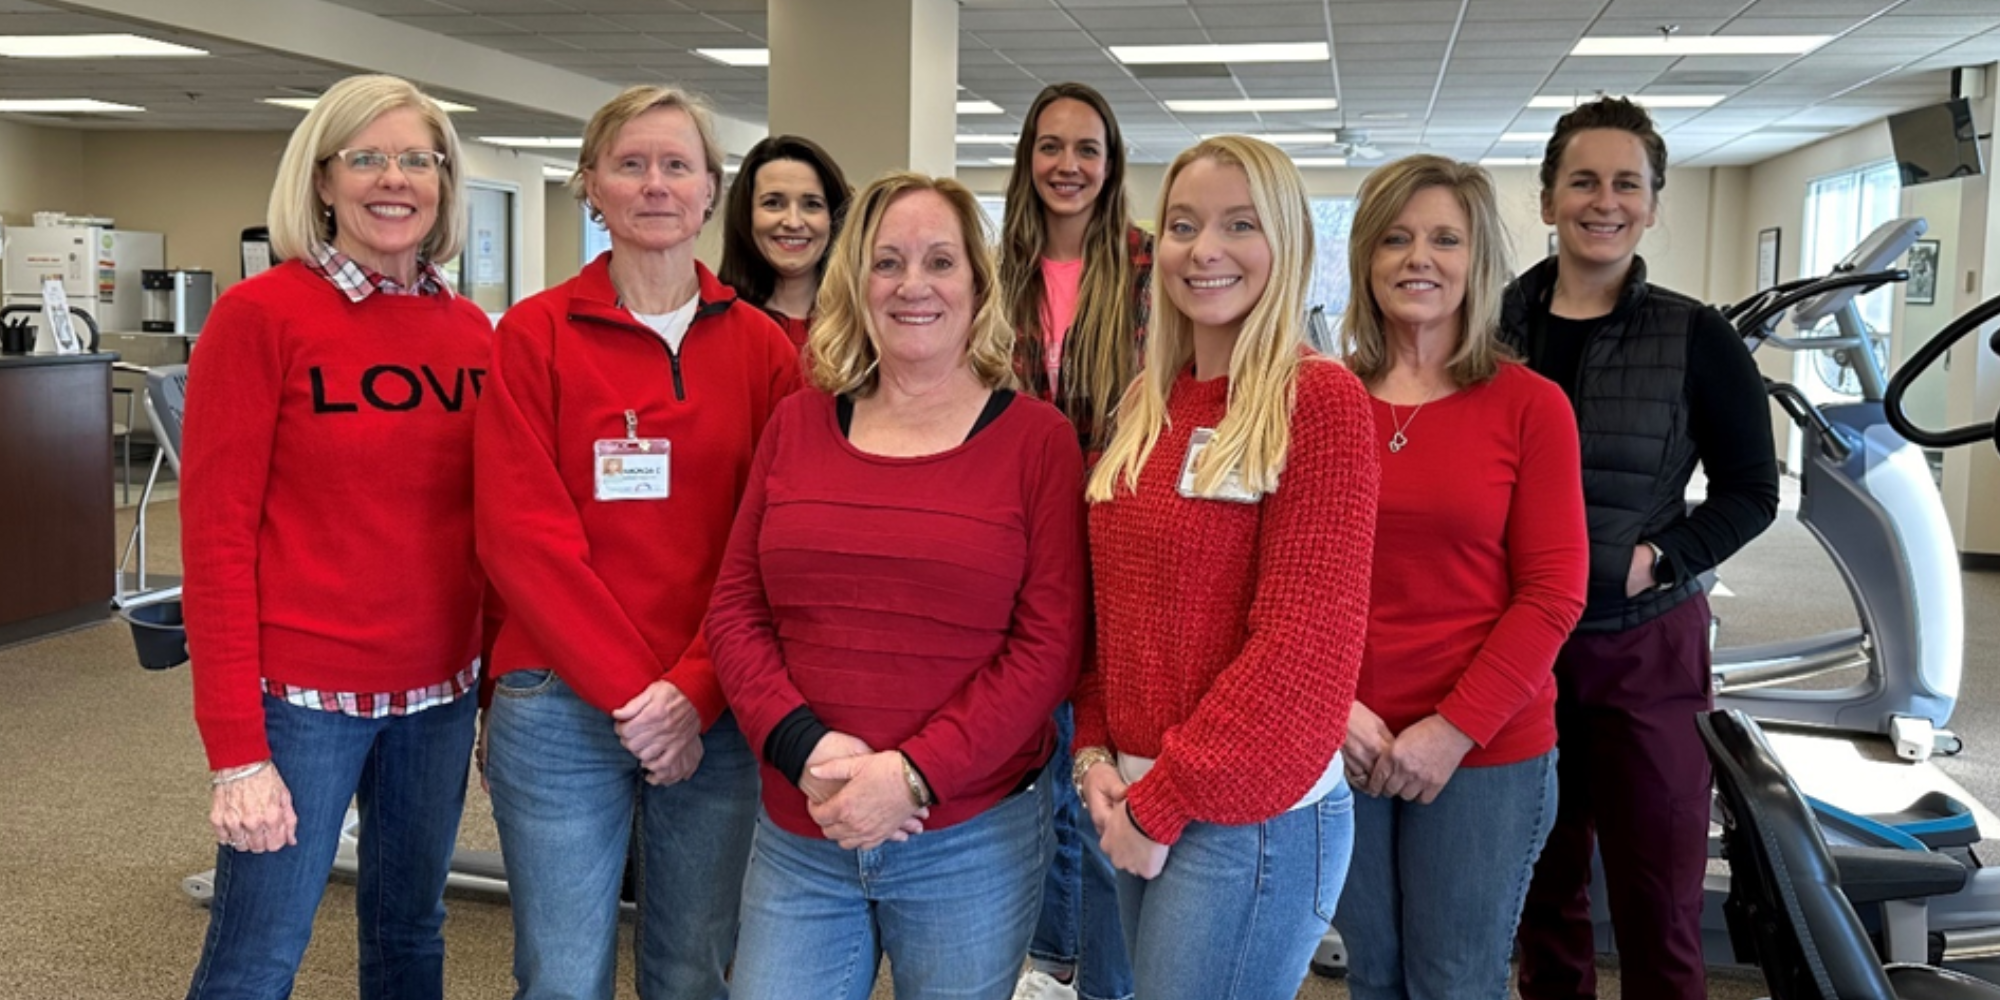 Parkwest team smiles at the camera posing for a group photo in their exercise room. They are all wearing red tops and blue jeans as the photo was taken during heart month on national wear red day.  